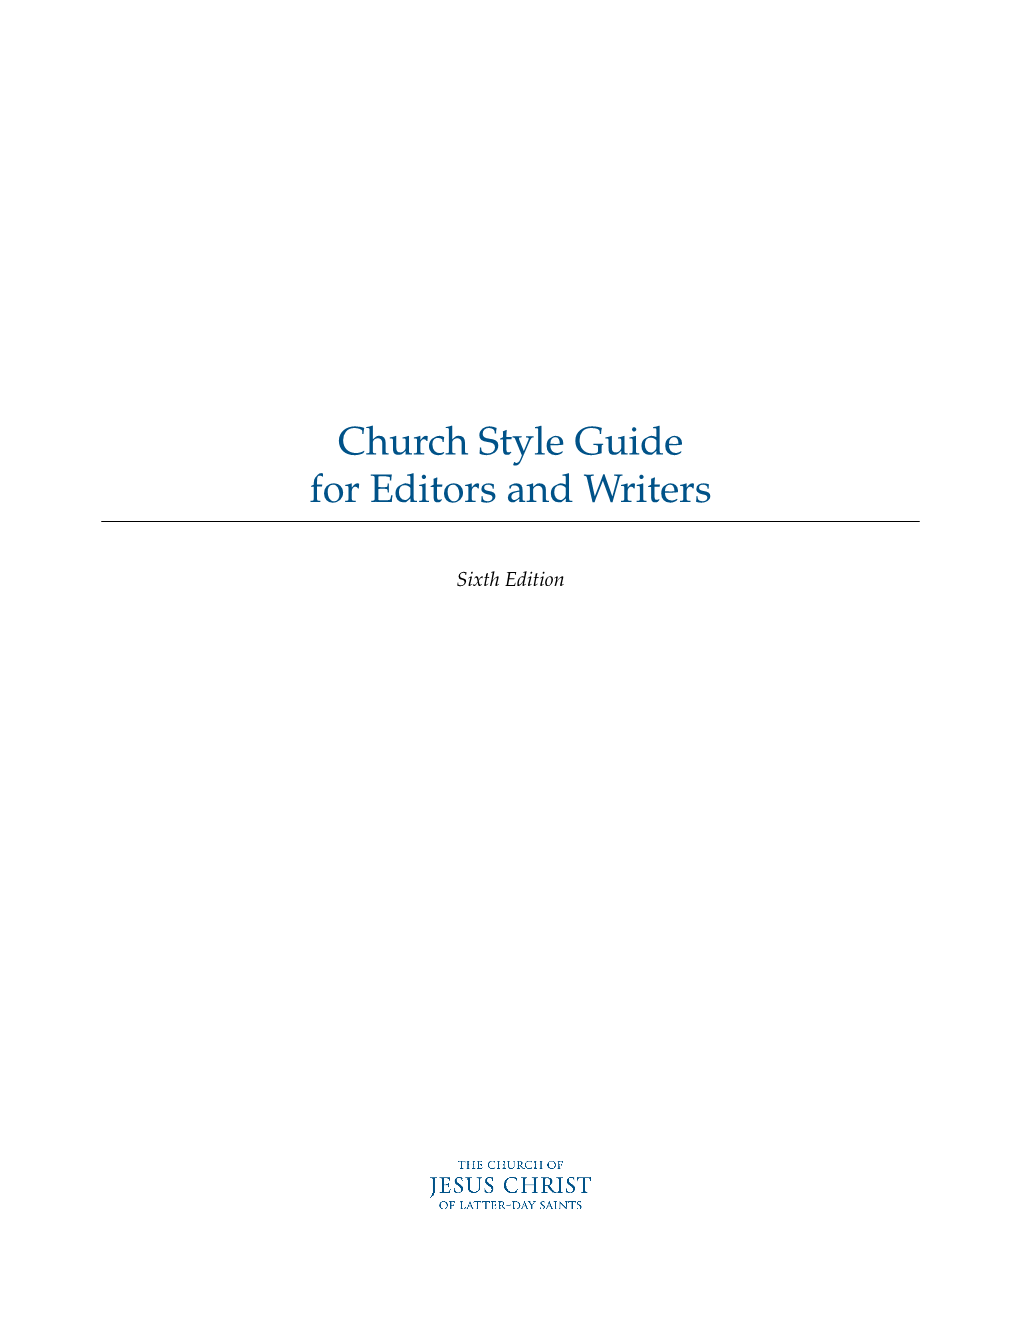 Church Style Guide for Editors and Writers